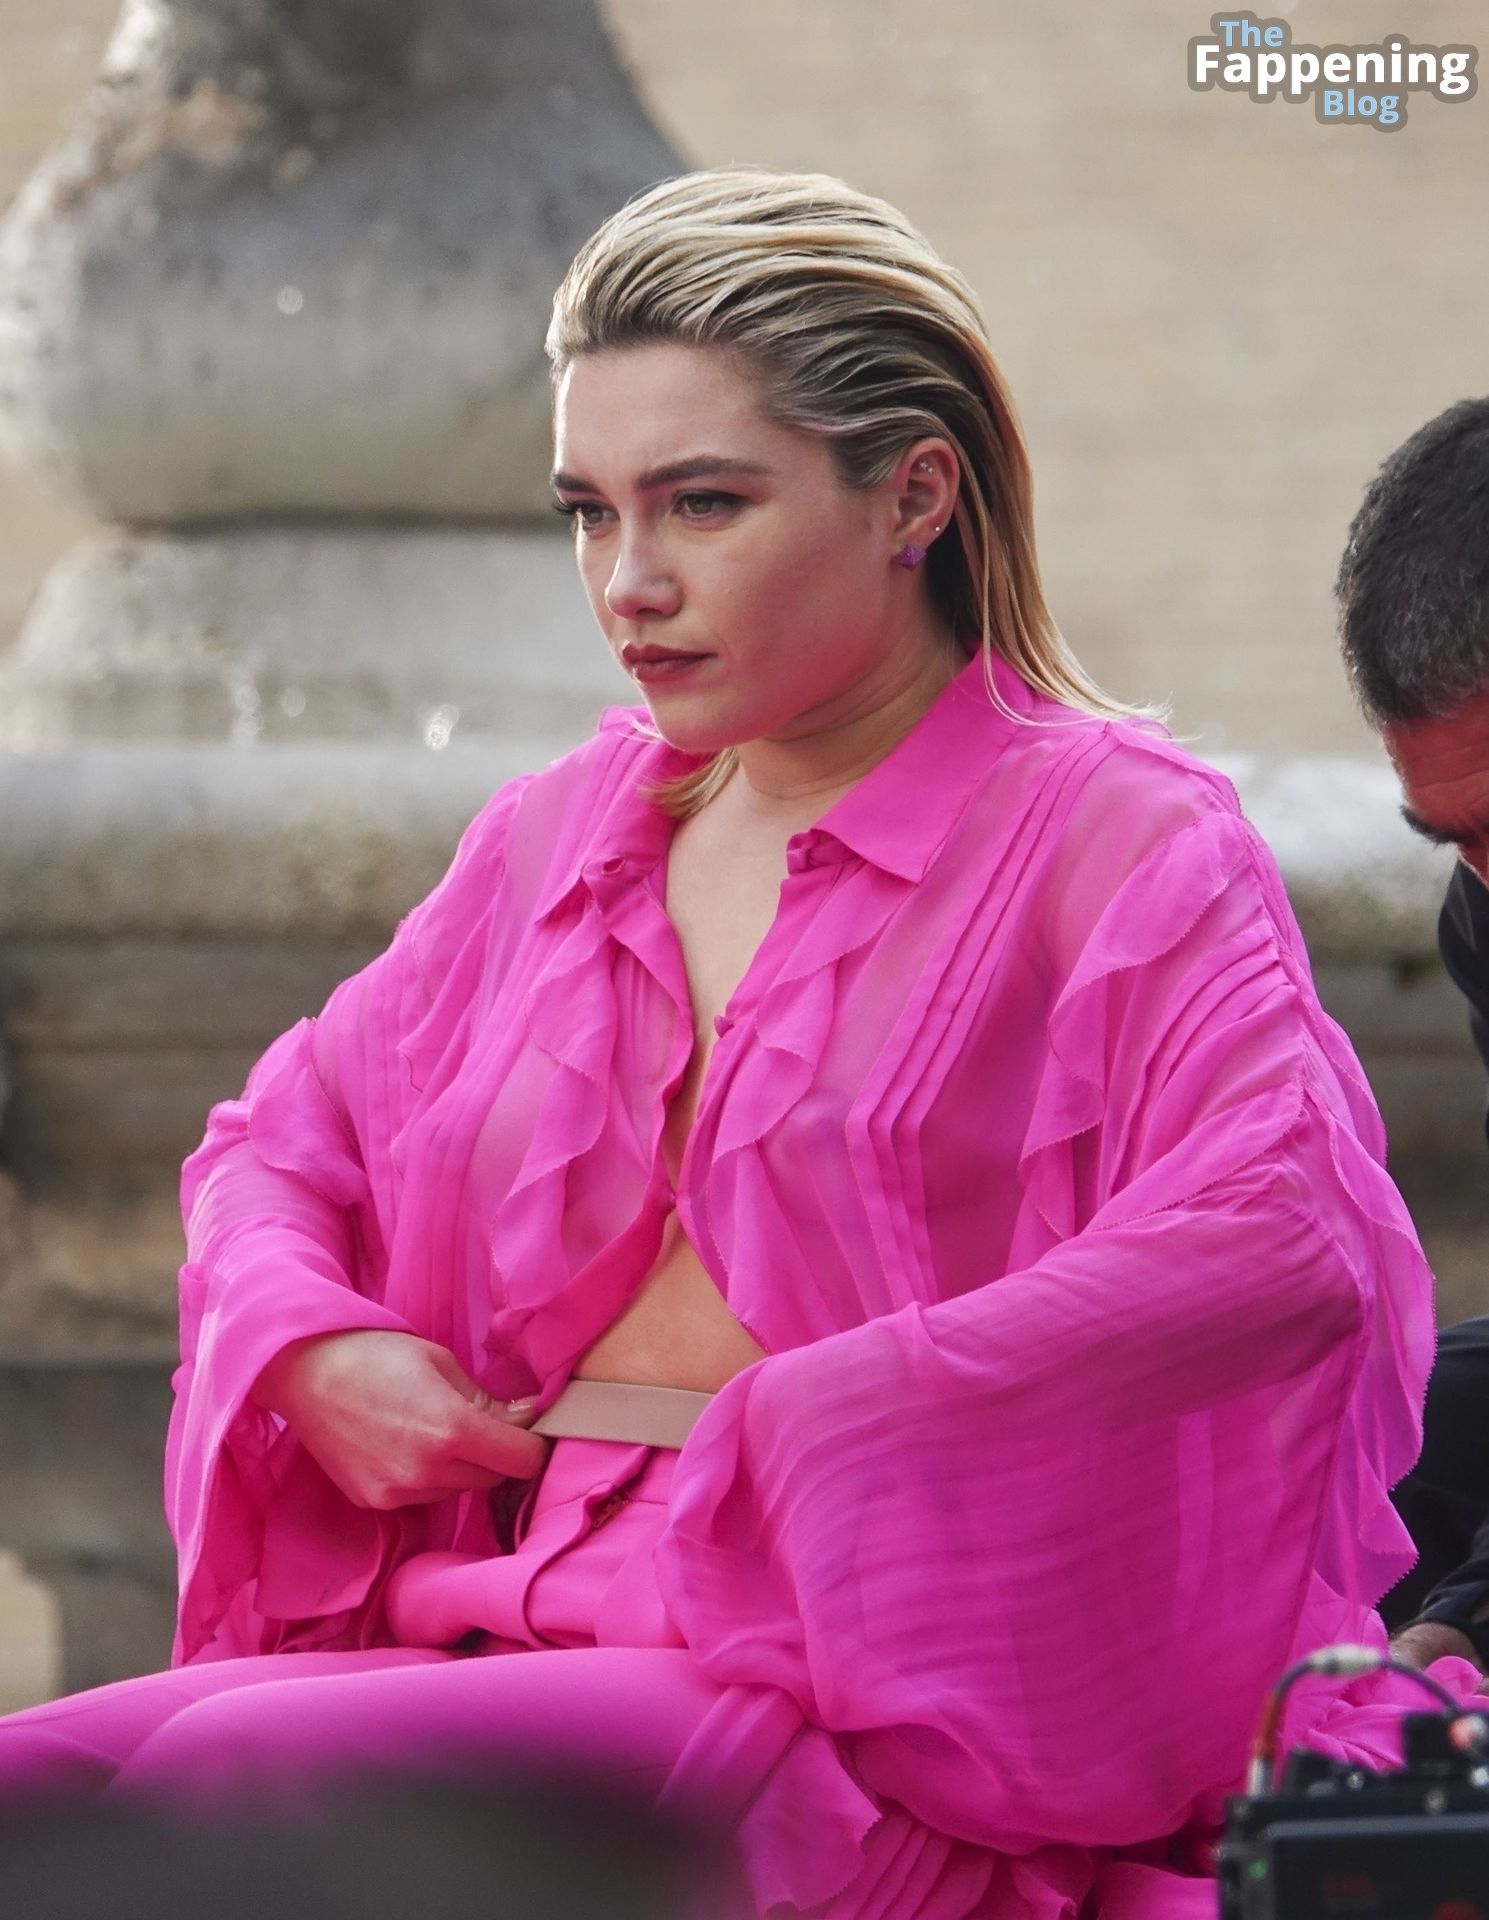 Florence-Pugh-Nude-Tits-The-Fappening-Blog-70.jpg